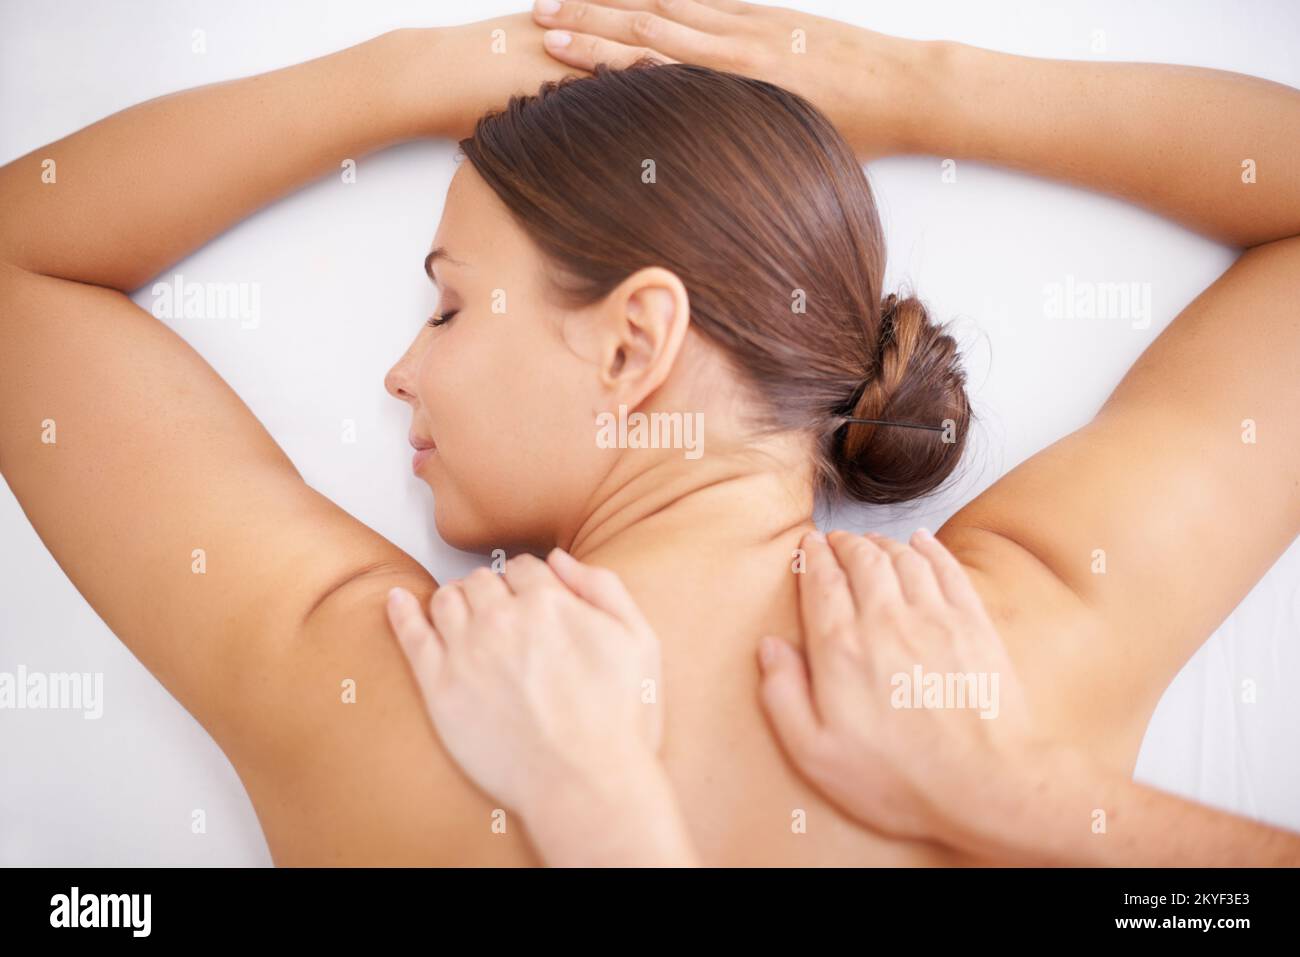 Blissful pampering. A young woman lying in a health spa getting pampered. Stock Photo